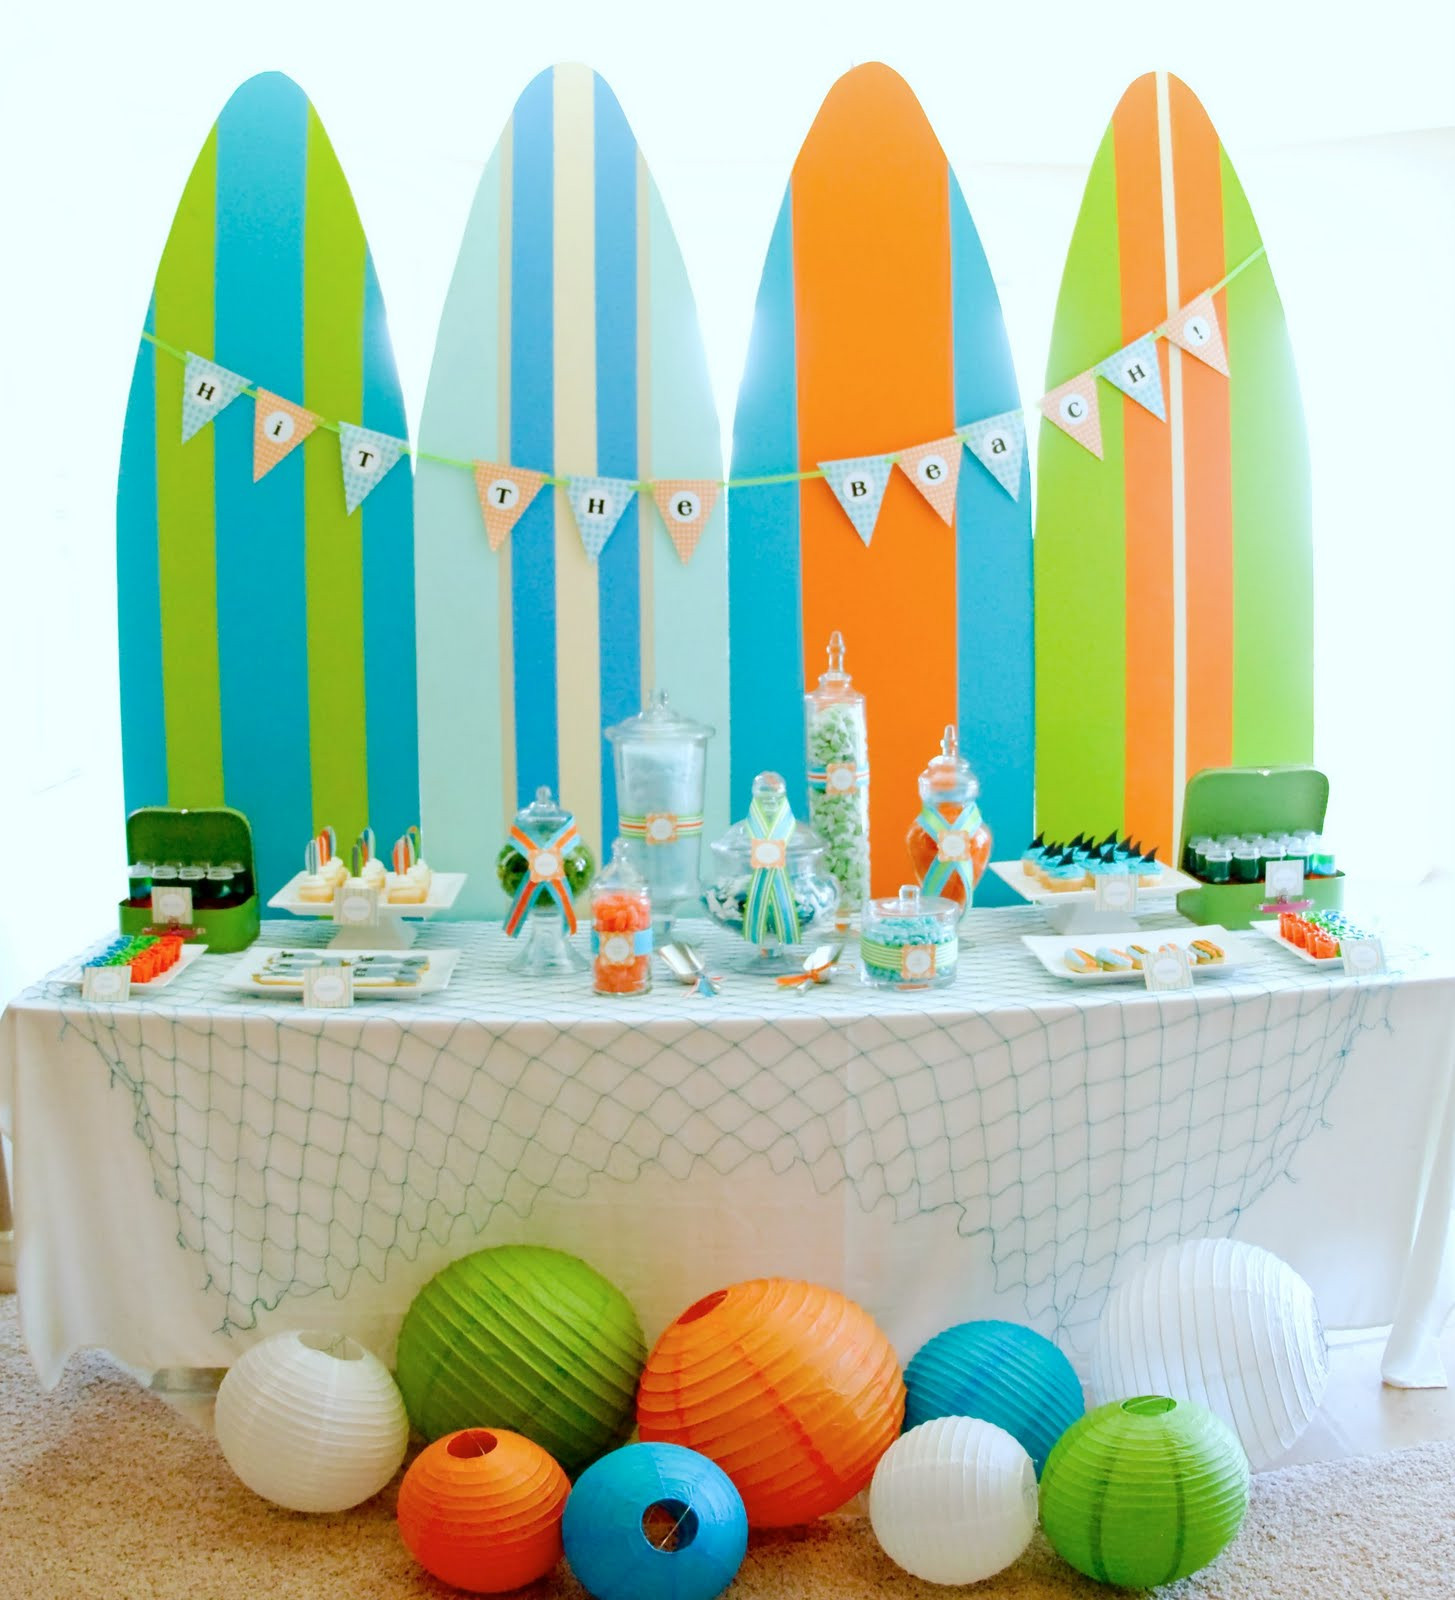 Ideas For A Beach Party Theme
 Kara s Party Ideas Surf s Up Summer Pool Party